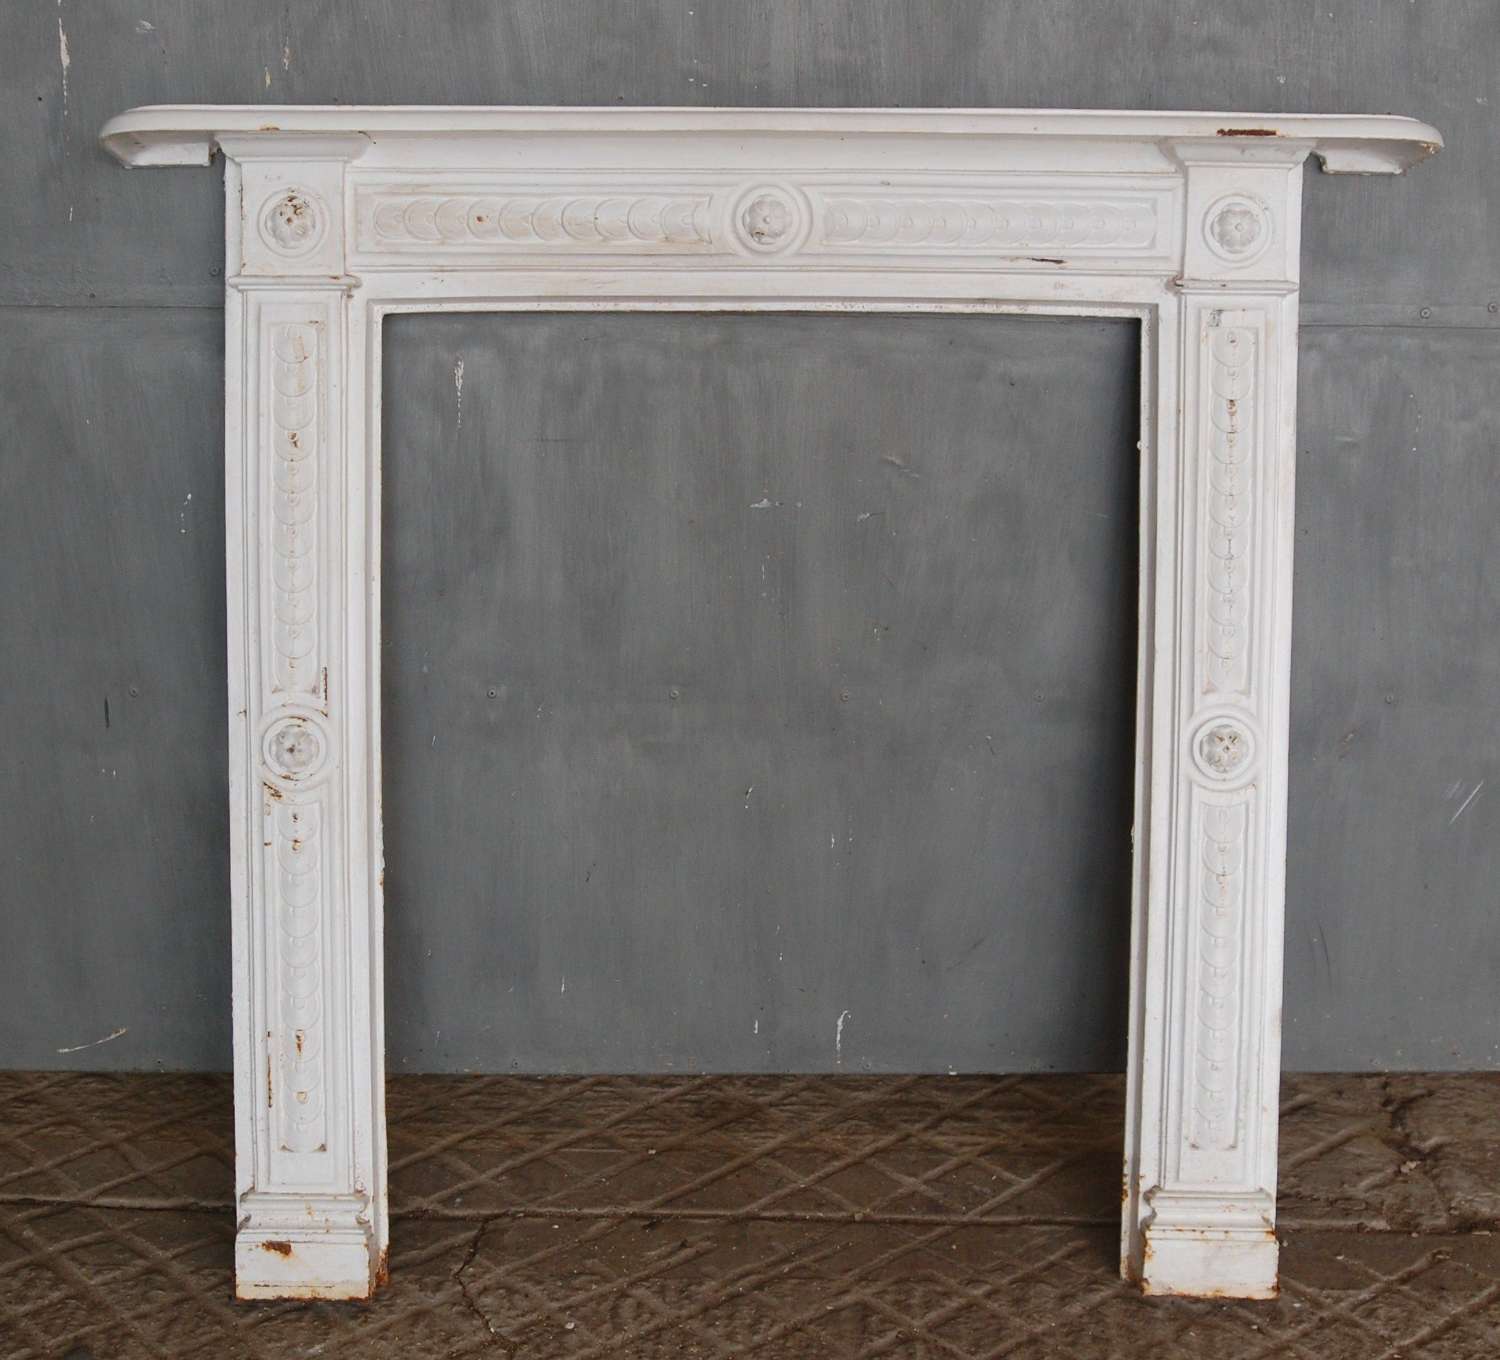 FS0132 RECLAIMED REPRODUCTION PAINTED CAST IRON FIRE SURROUND